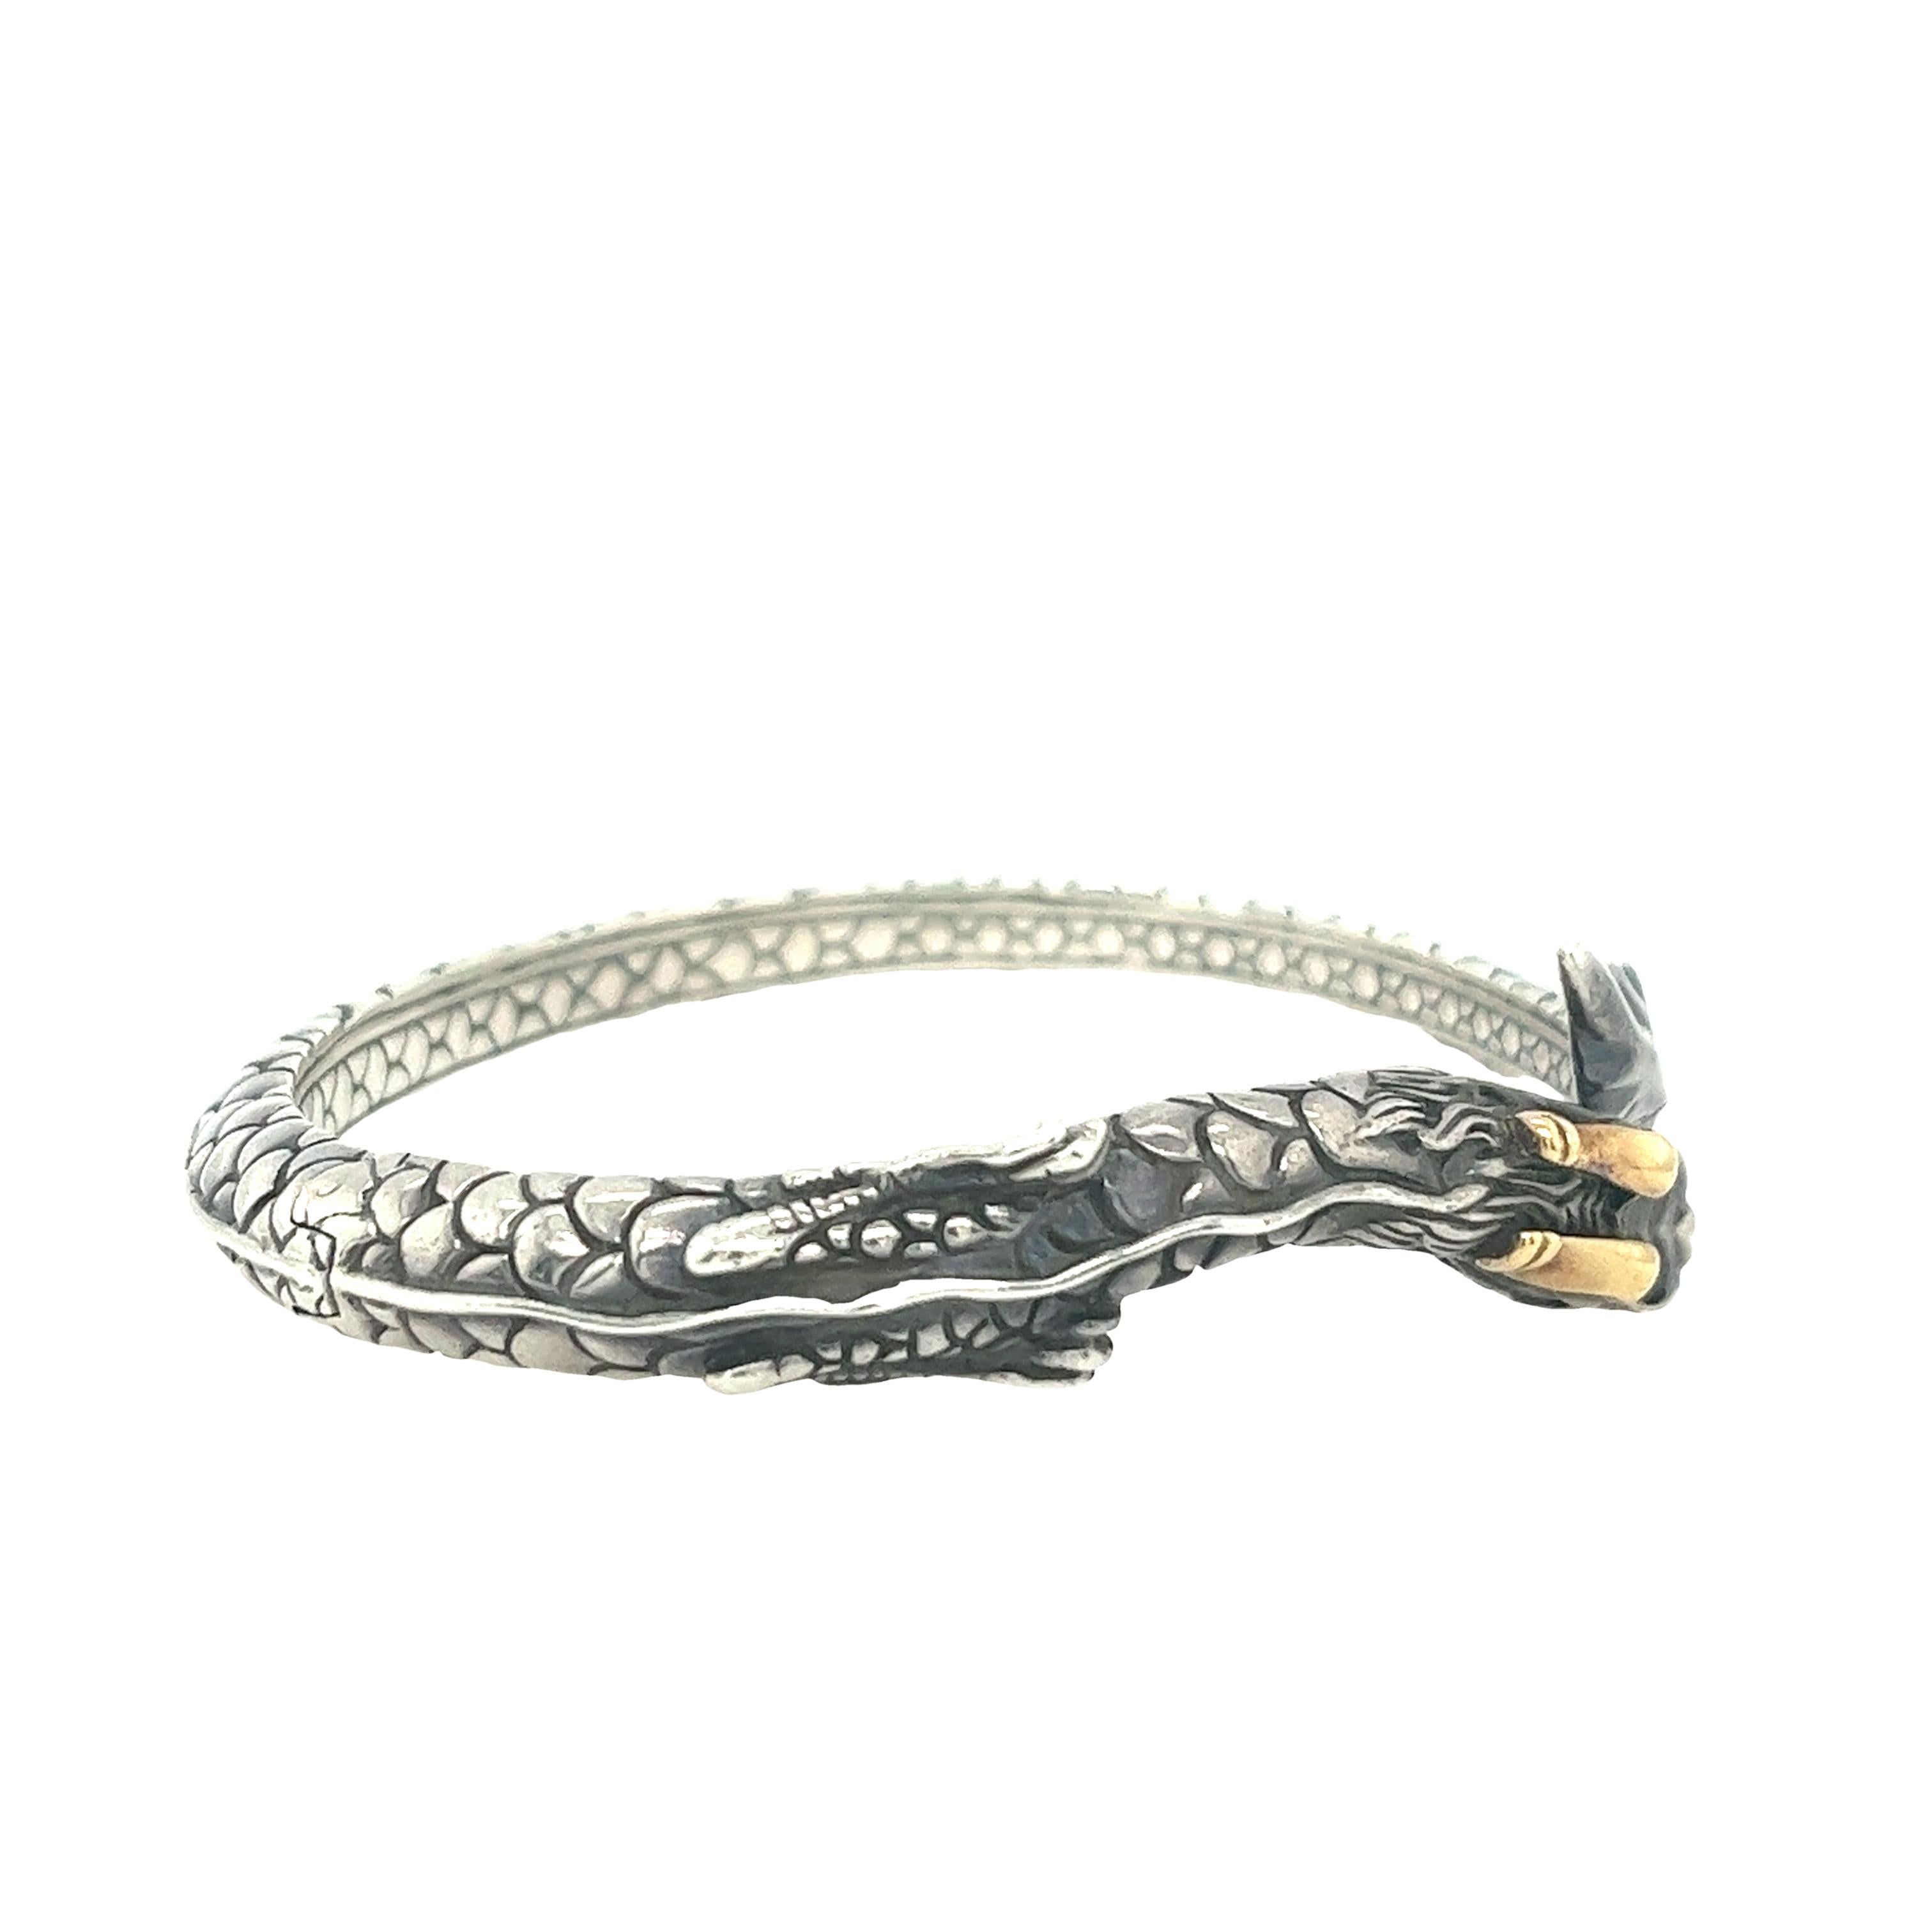 Stunning dragon kick-hinged naga dragon, is a captivating piece of jewellery 
With 925 sterling silver material and 18ct yellow gold.

Total Weight: 25.8g
Internal Diameter: 60.55mm x 45.50mm
Head Size: 15mm
Width of Bangle: 5.77mm
Papers &